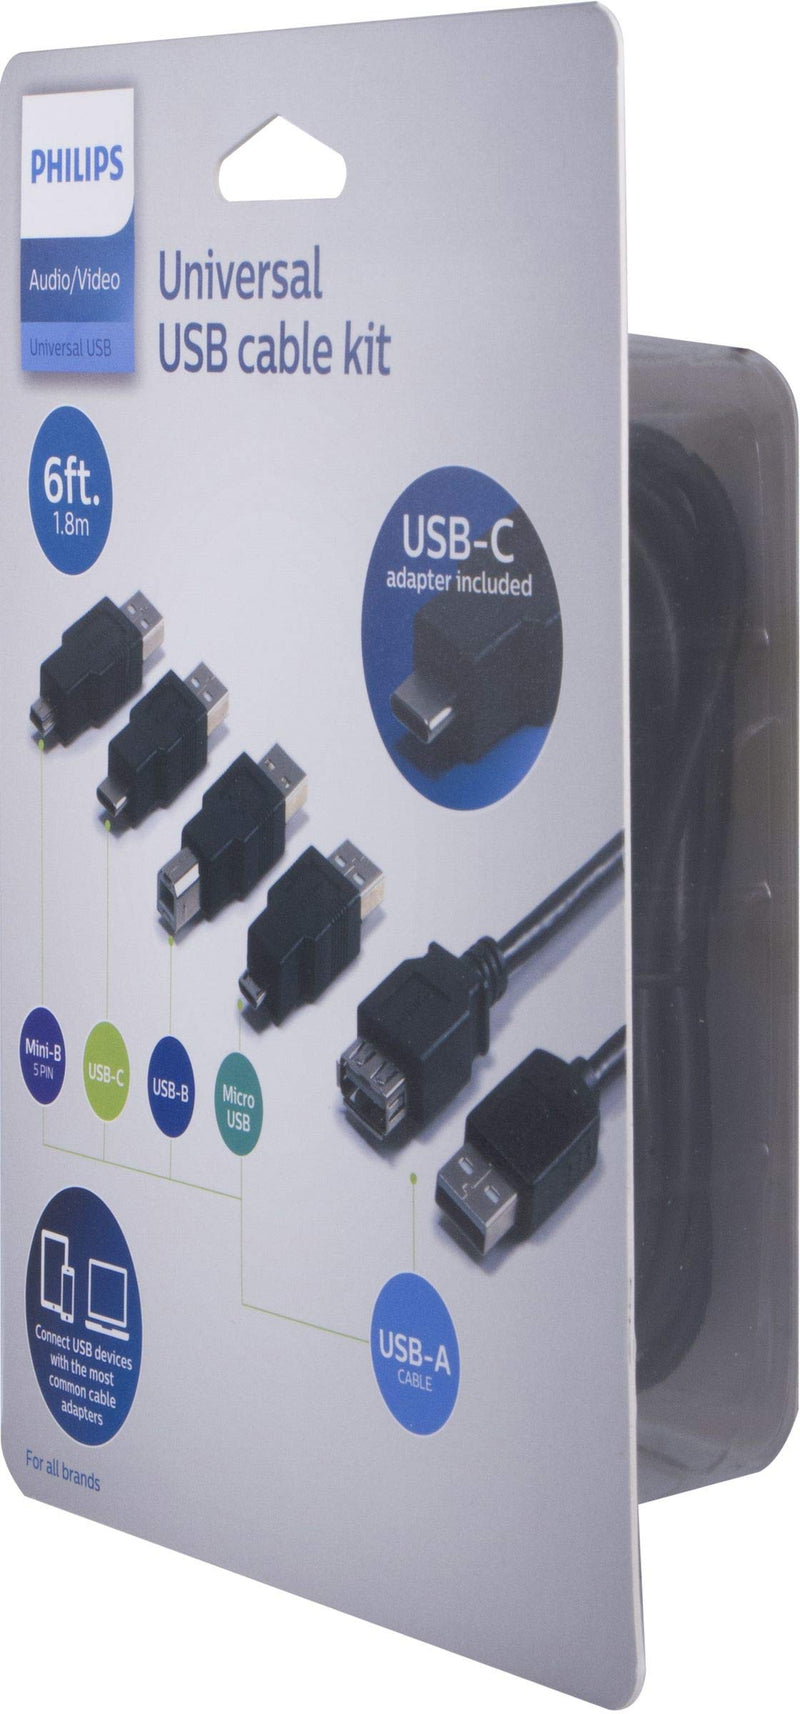  [AUSTRALIA] - Philips 5-in-1 Universal USB Cable Kit, Includes Adapters for: Mini-B (5 PIN), USB-C, USB-B, Micro USB, and USB-A 2.0 Cable, for Mobile Devices, Laptops, Printers, Scanners, Cameras, SWU8002N/27